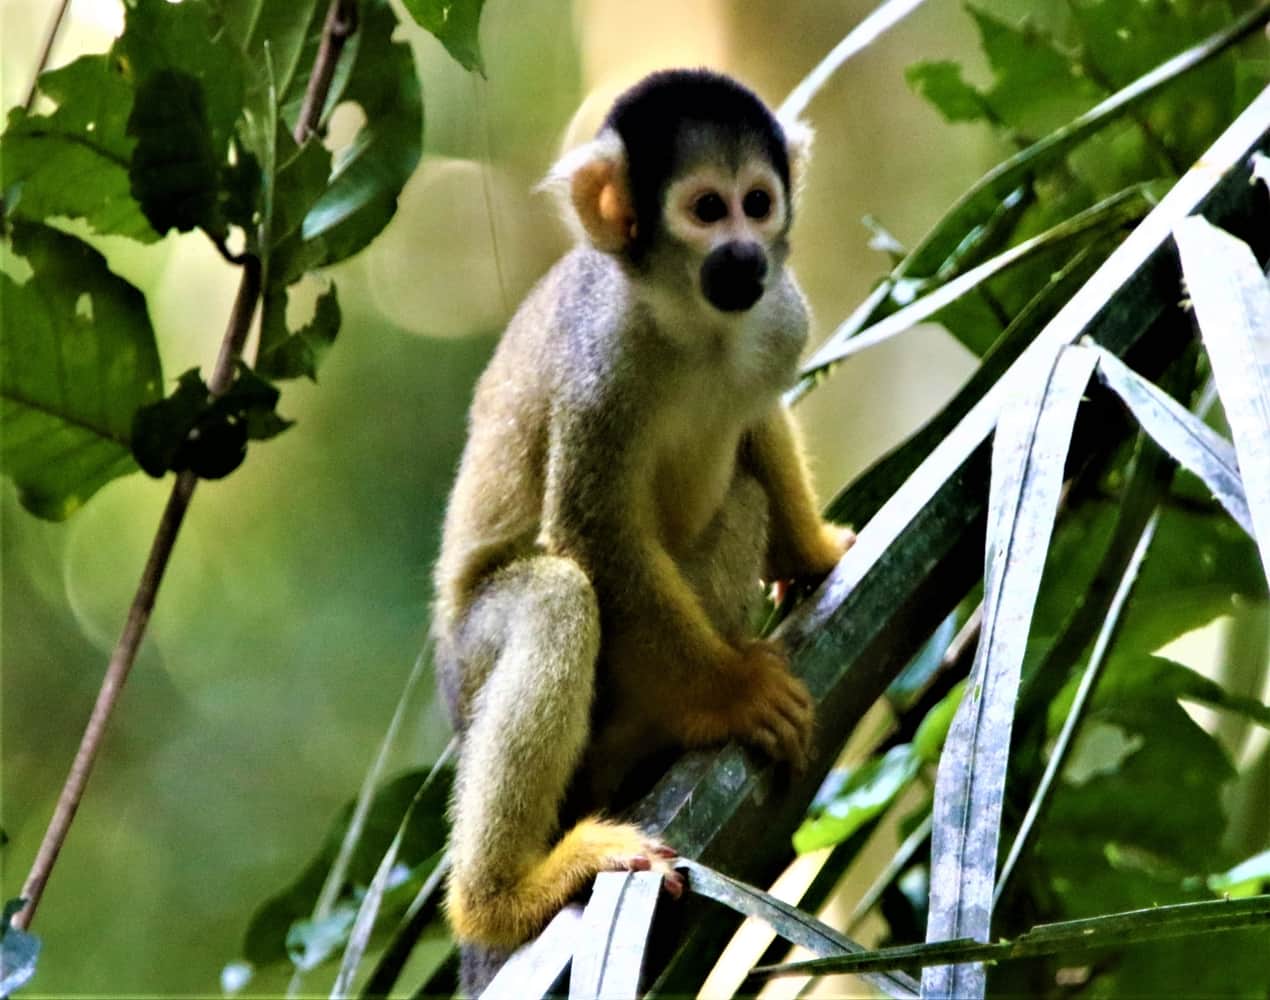 A squirrel monkey perched in a tree in the Amazon Rainforest